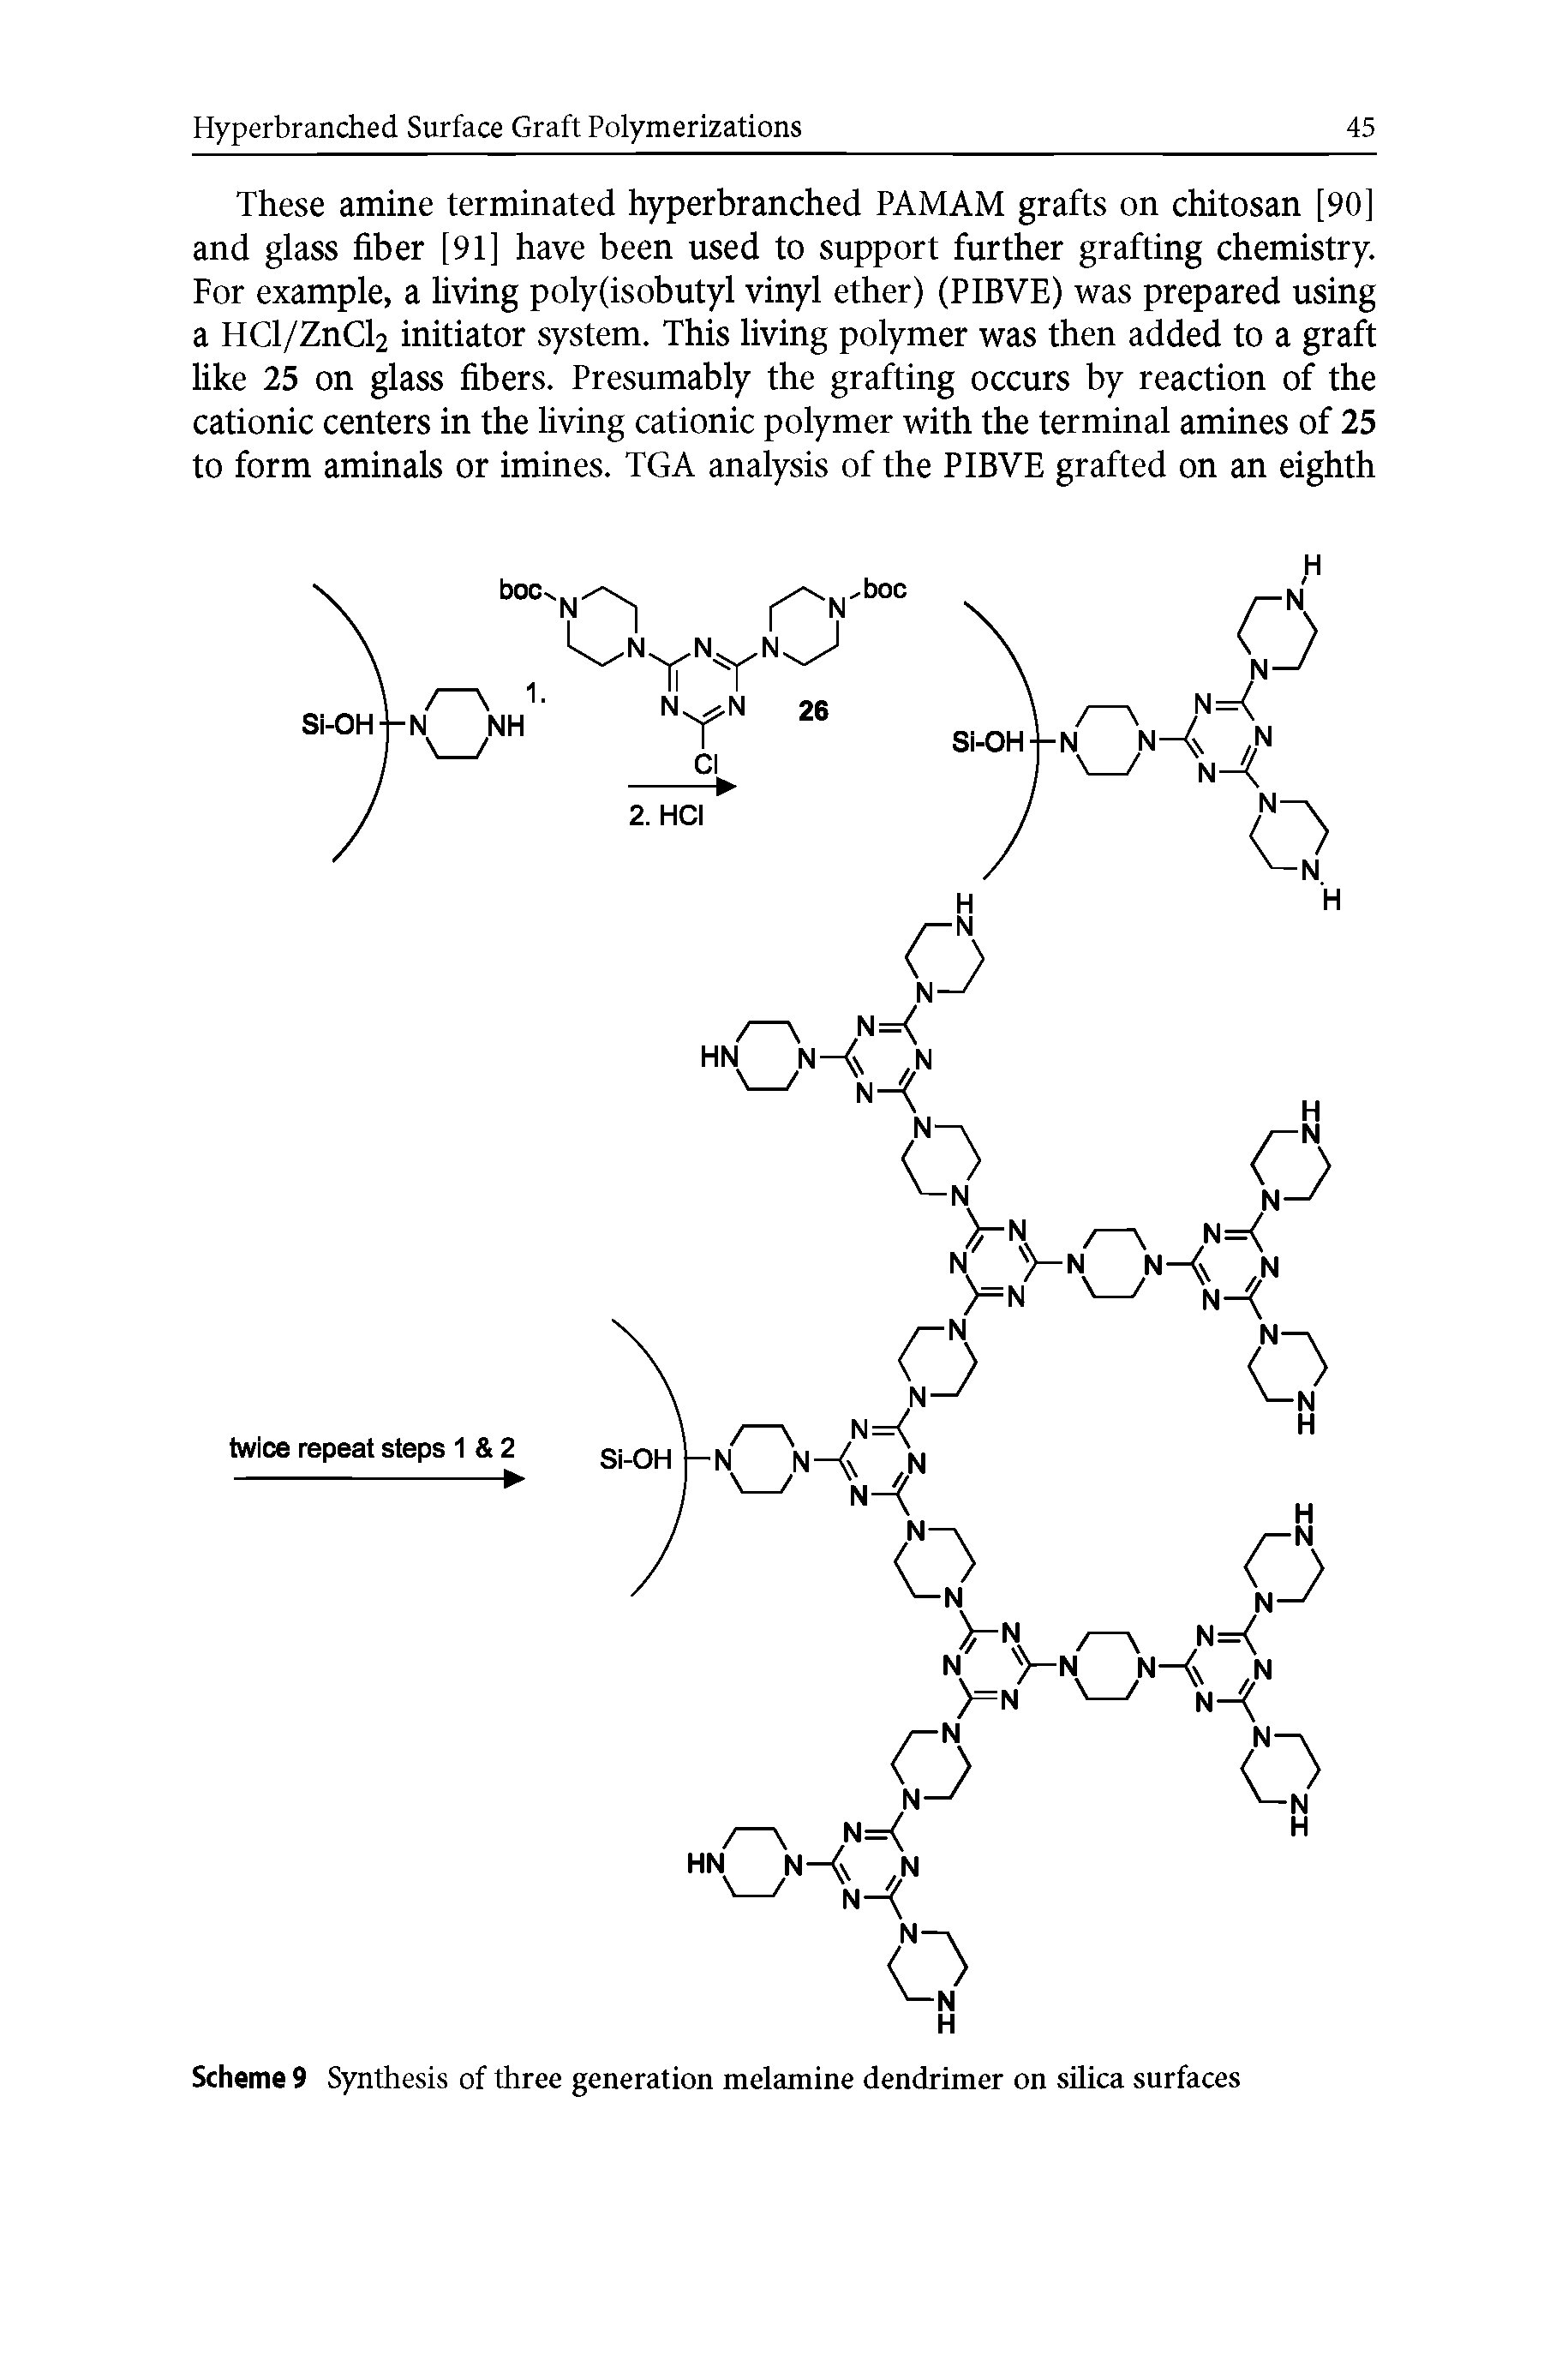 Scheme 9 Synthesis of three generation melamine dendrimer on silica surfaces...